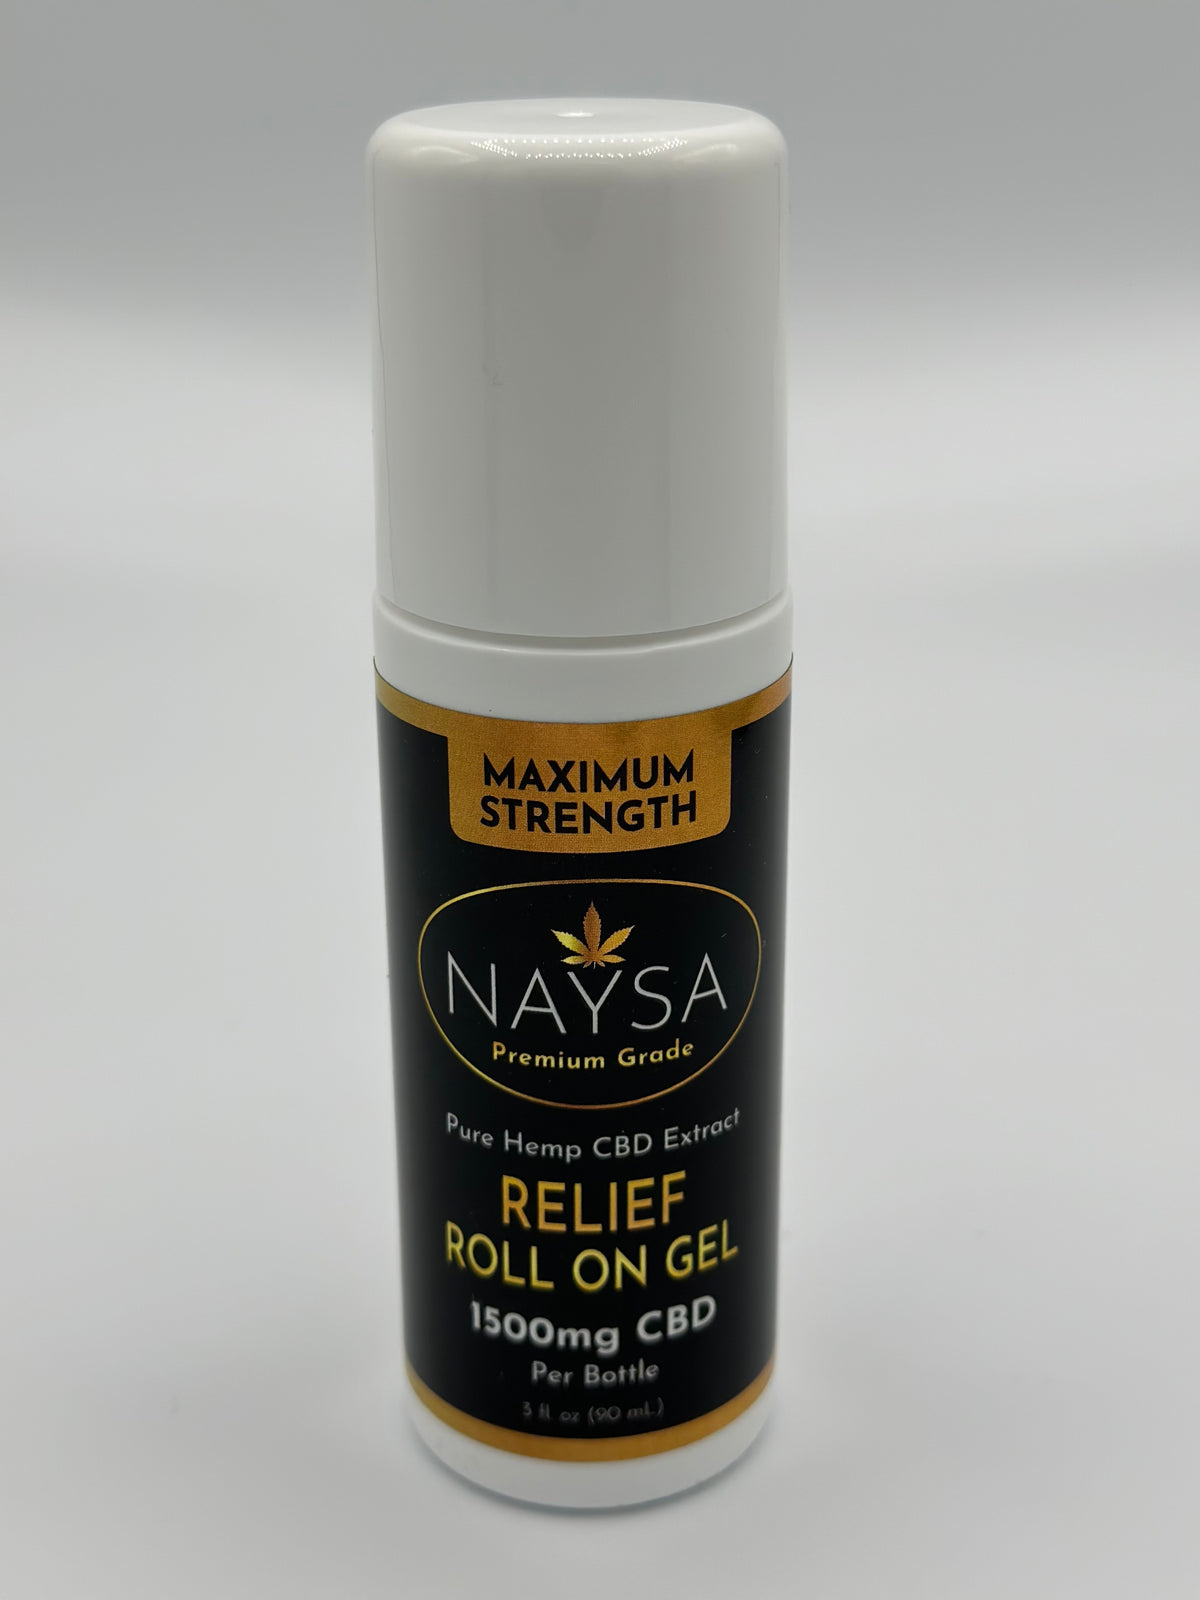 Relief Roll on Gel with 1500mg of CBD